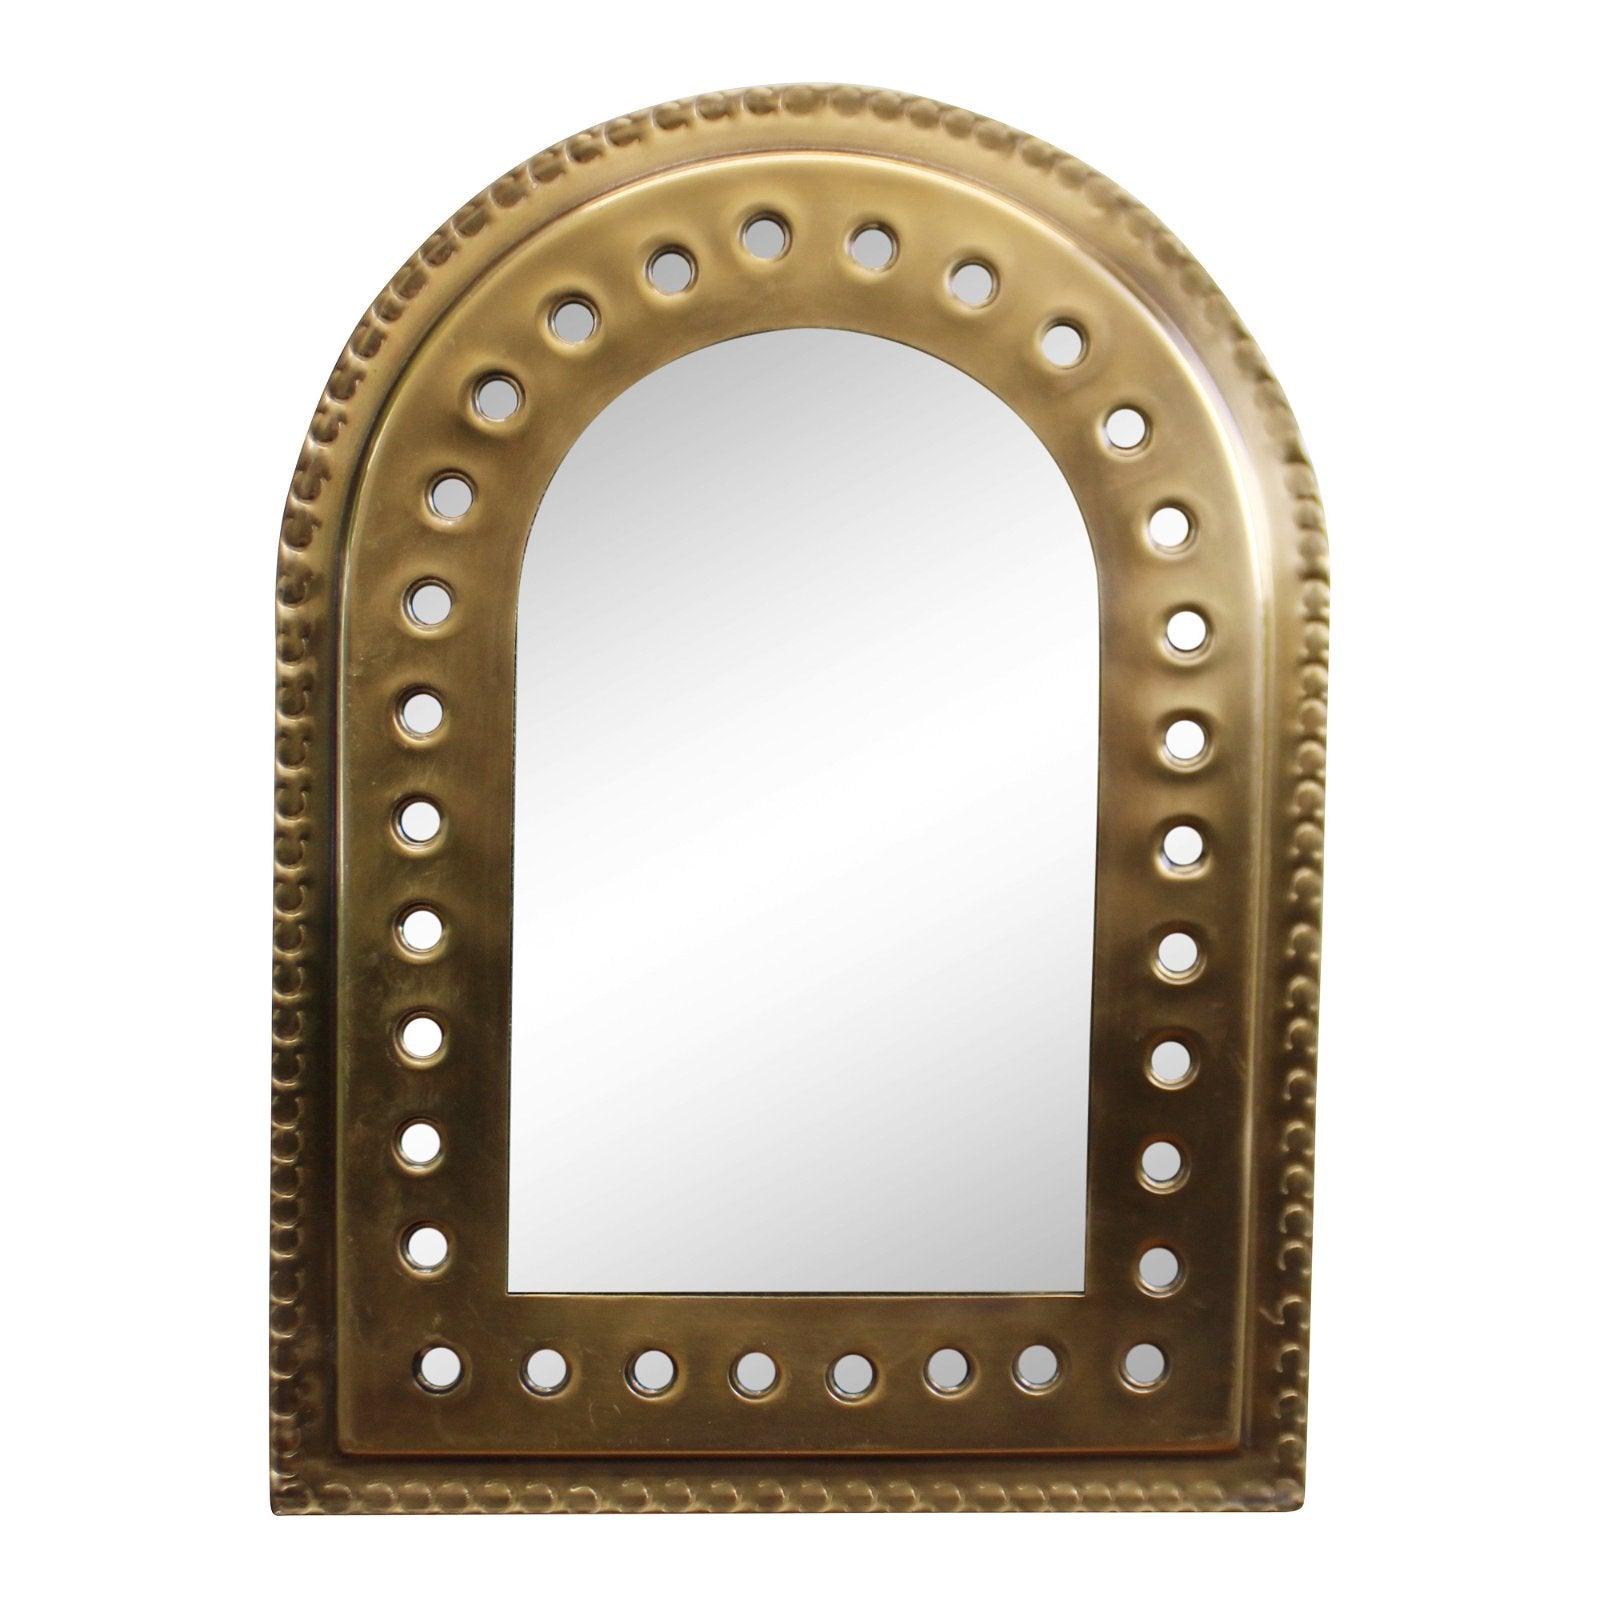 View Set of 5 Gold Coloured Decorative Mirrors information